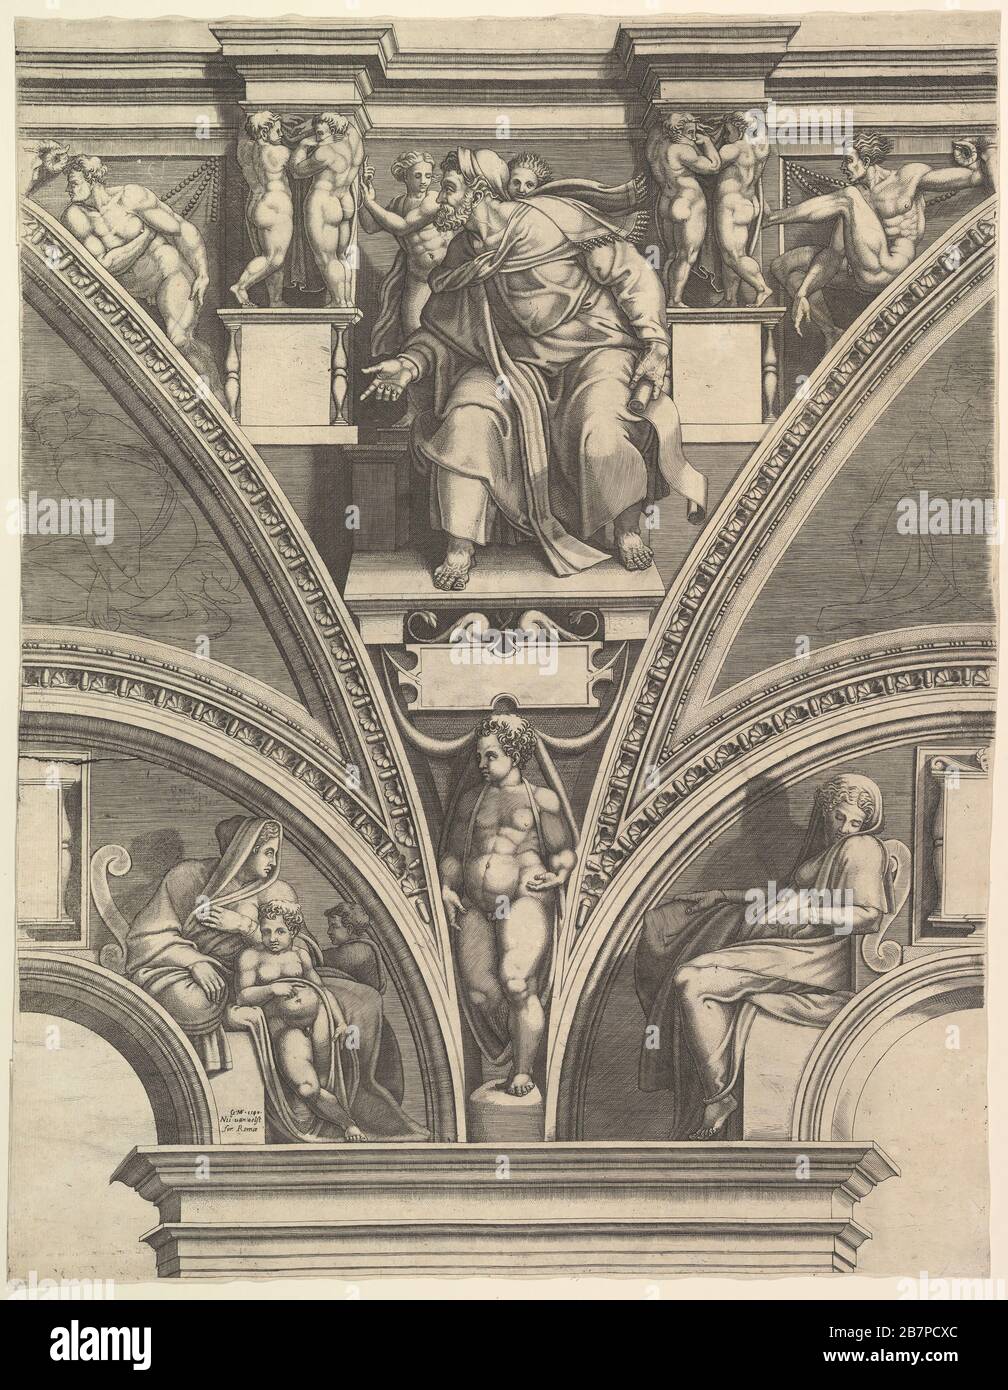 The Prophet Ezekiel; from the series of Prophets and Sibyls in the Sistine Chapel , 1570-75. After Michelangelo Buonarroti Stock Photo